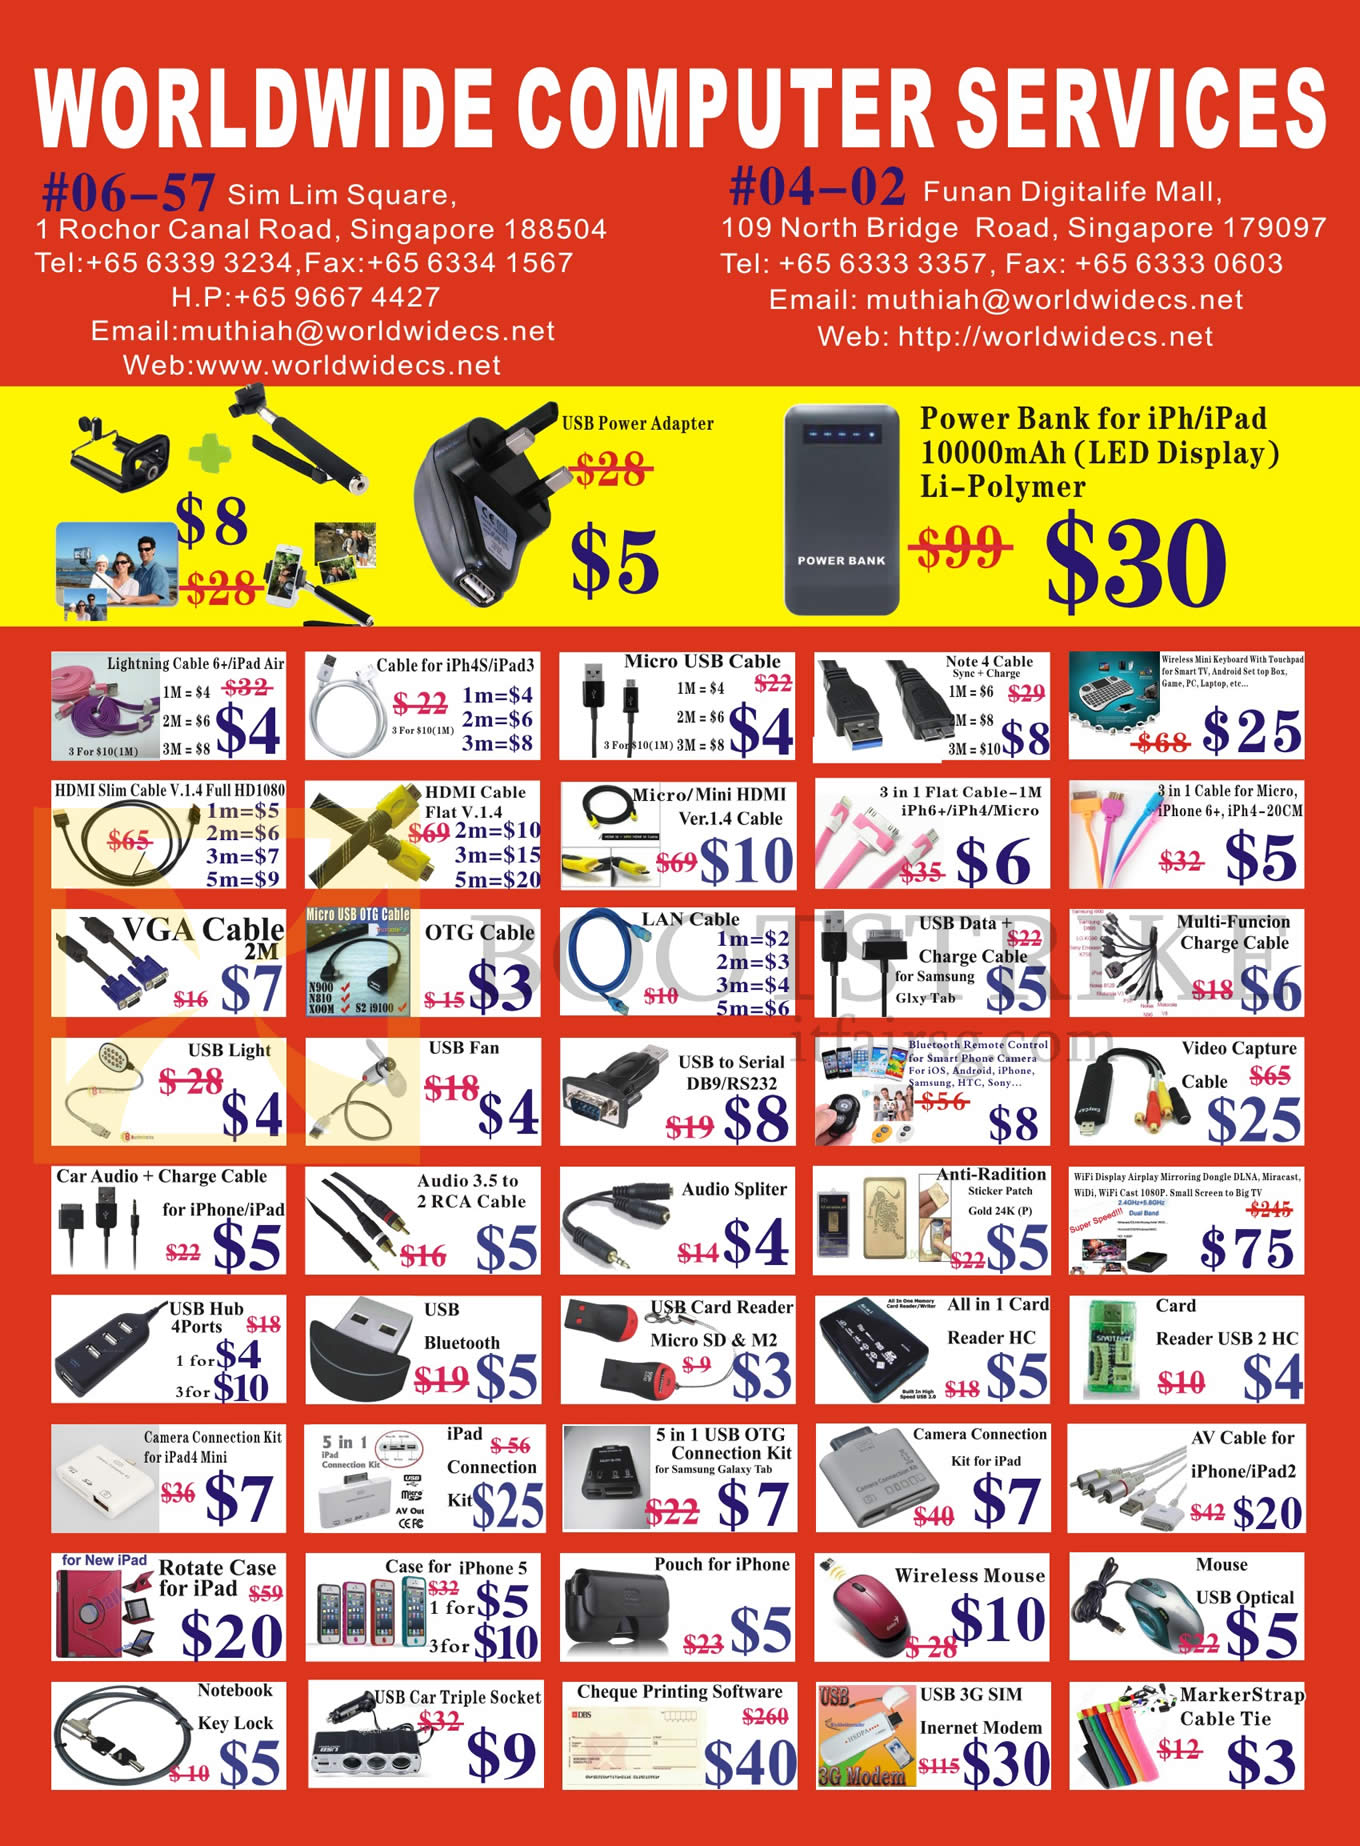 SITEX 2014 price list image brochure of Worldwide Computer Services Cables, Pouches, Cases, Mouse, USB Hub, Card Readers